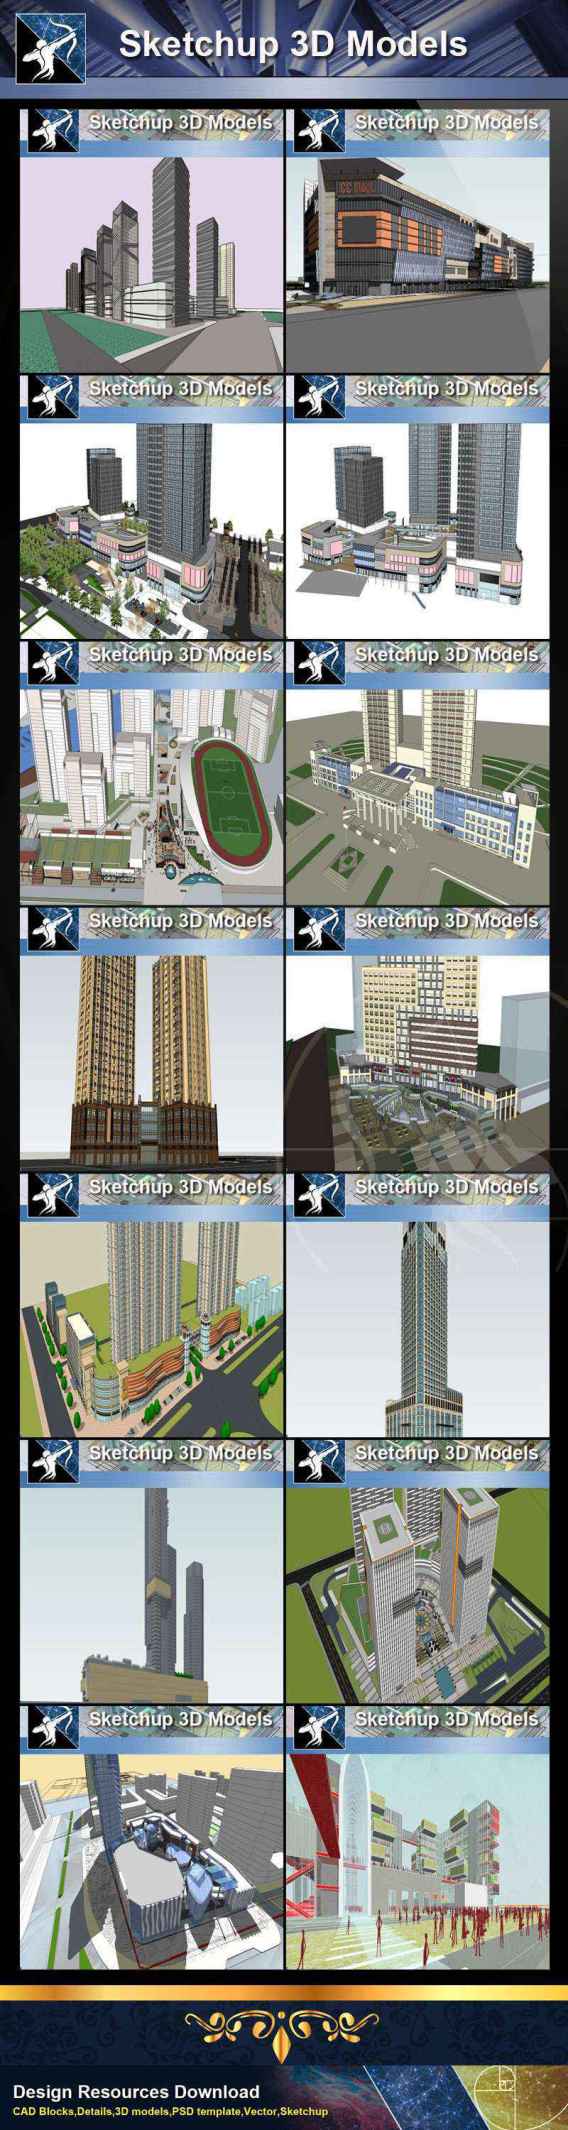 ★Best 20 Types of City,Residential Building Sketchup 3D Models Collection